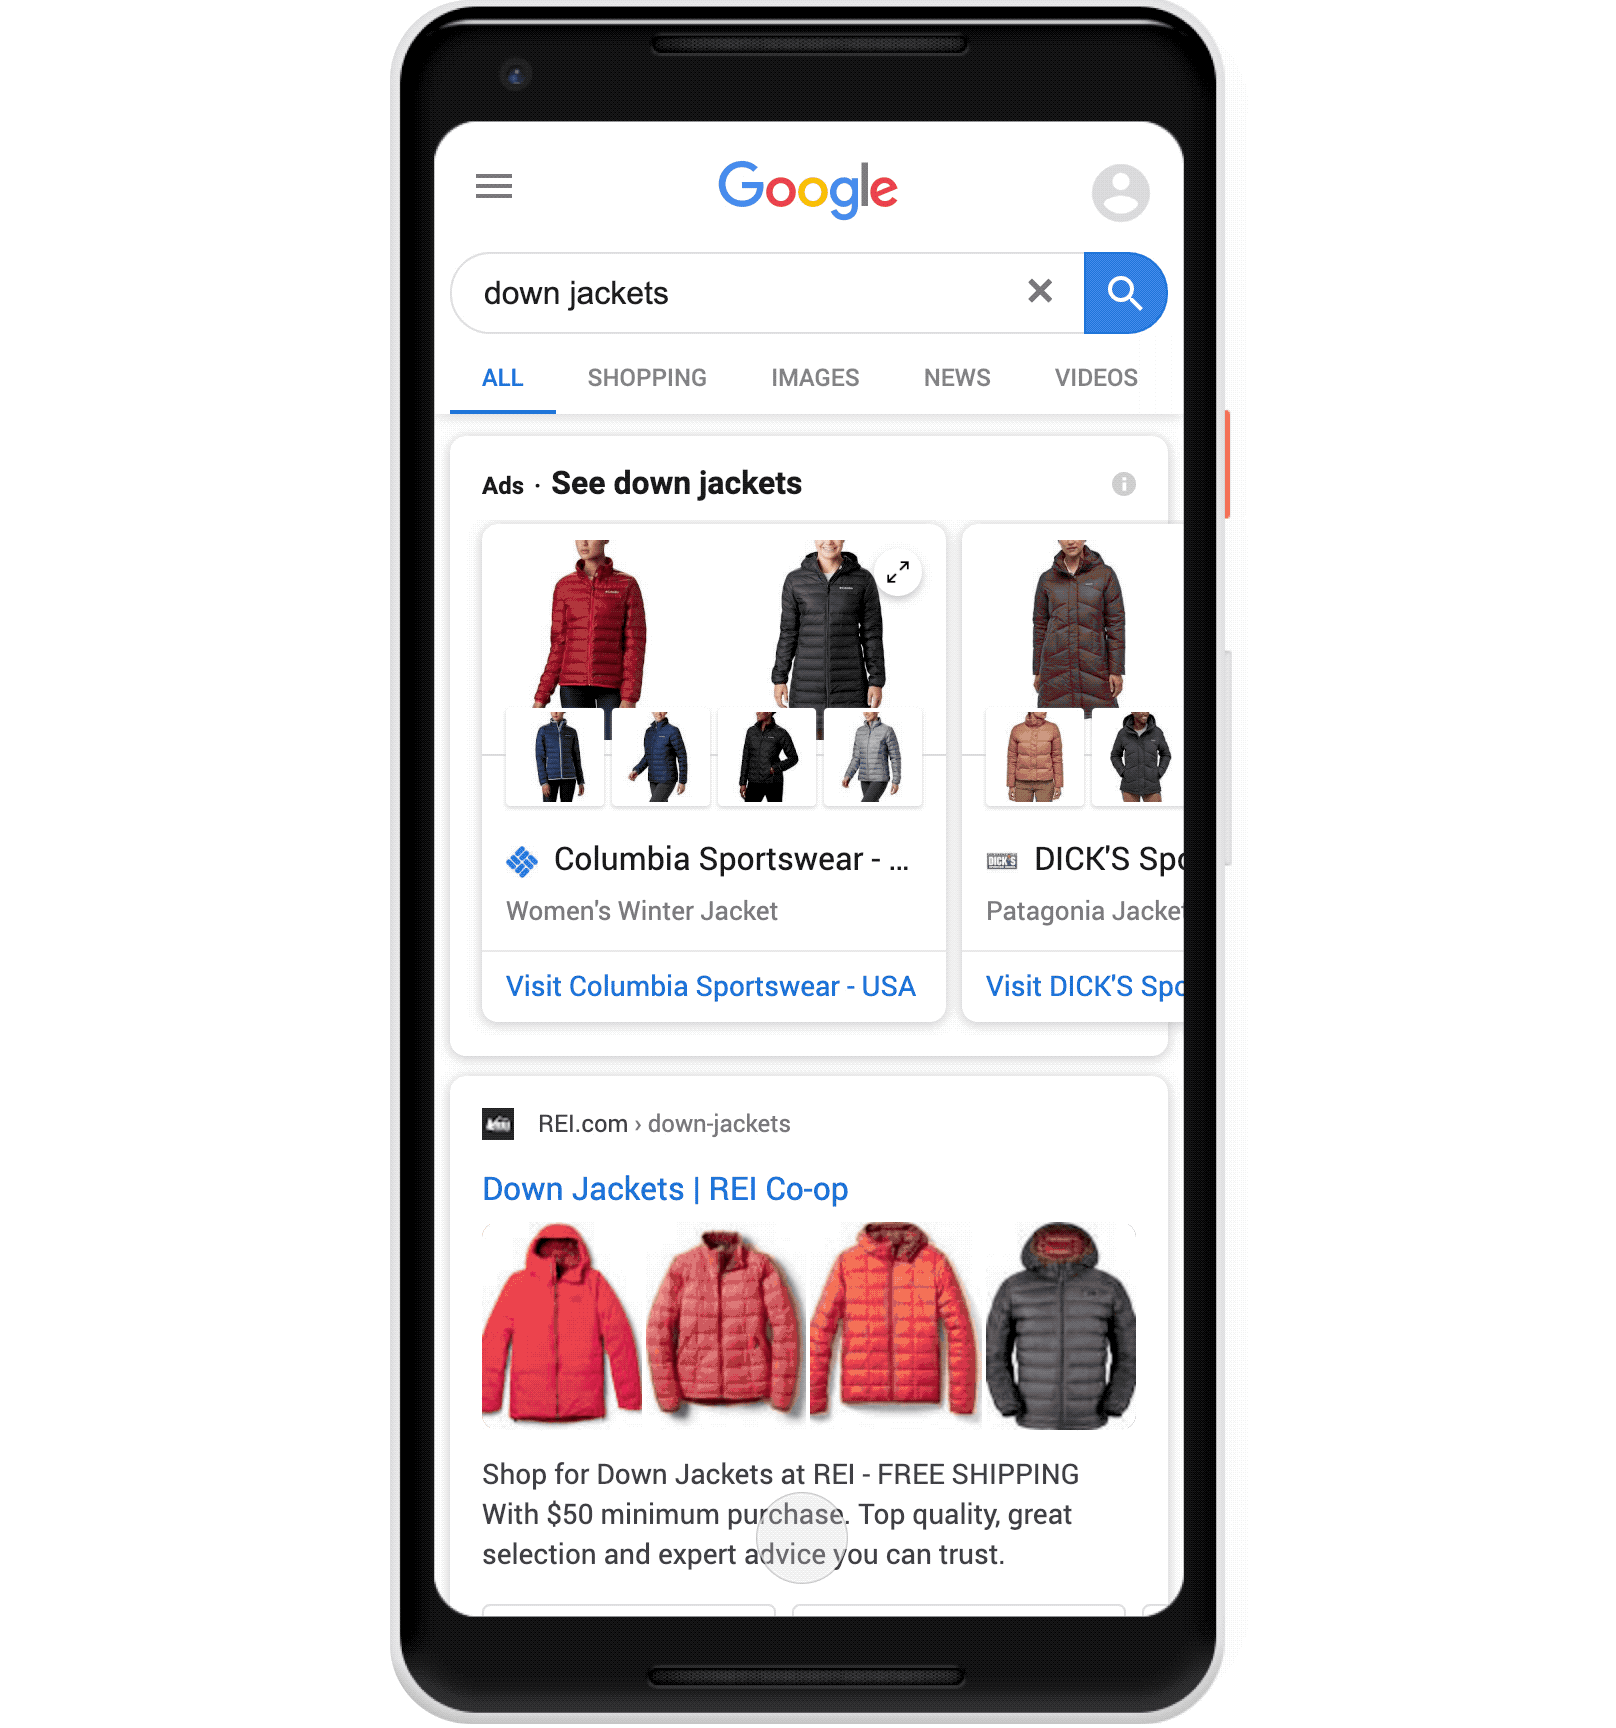 Animated GIF showing Google product carousel of down jackets in organic results